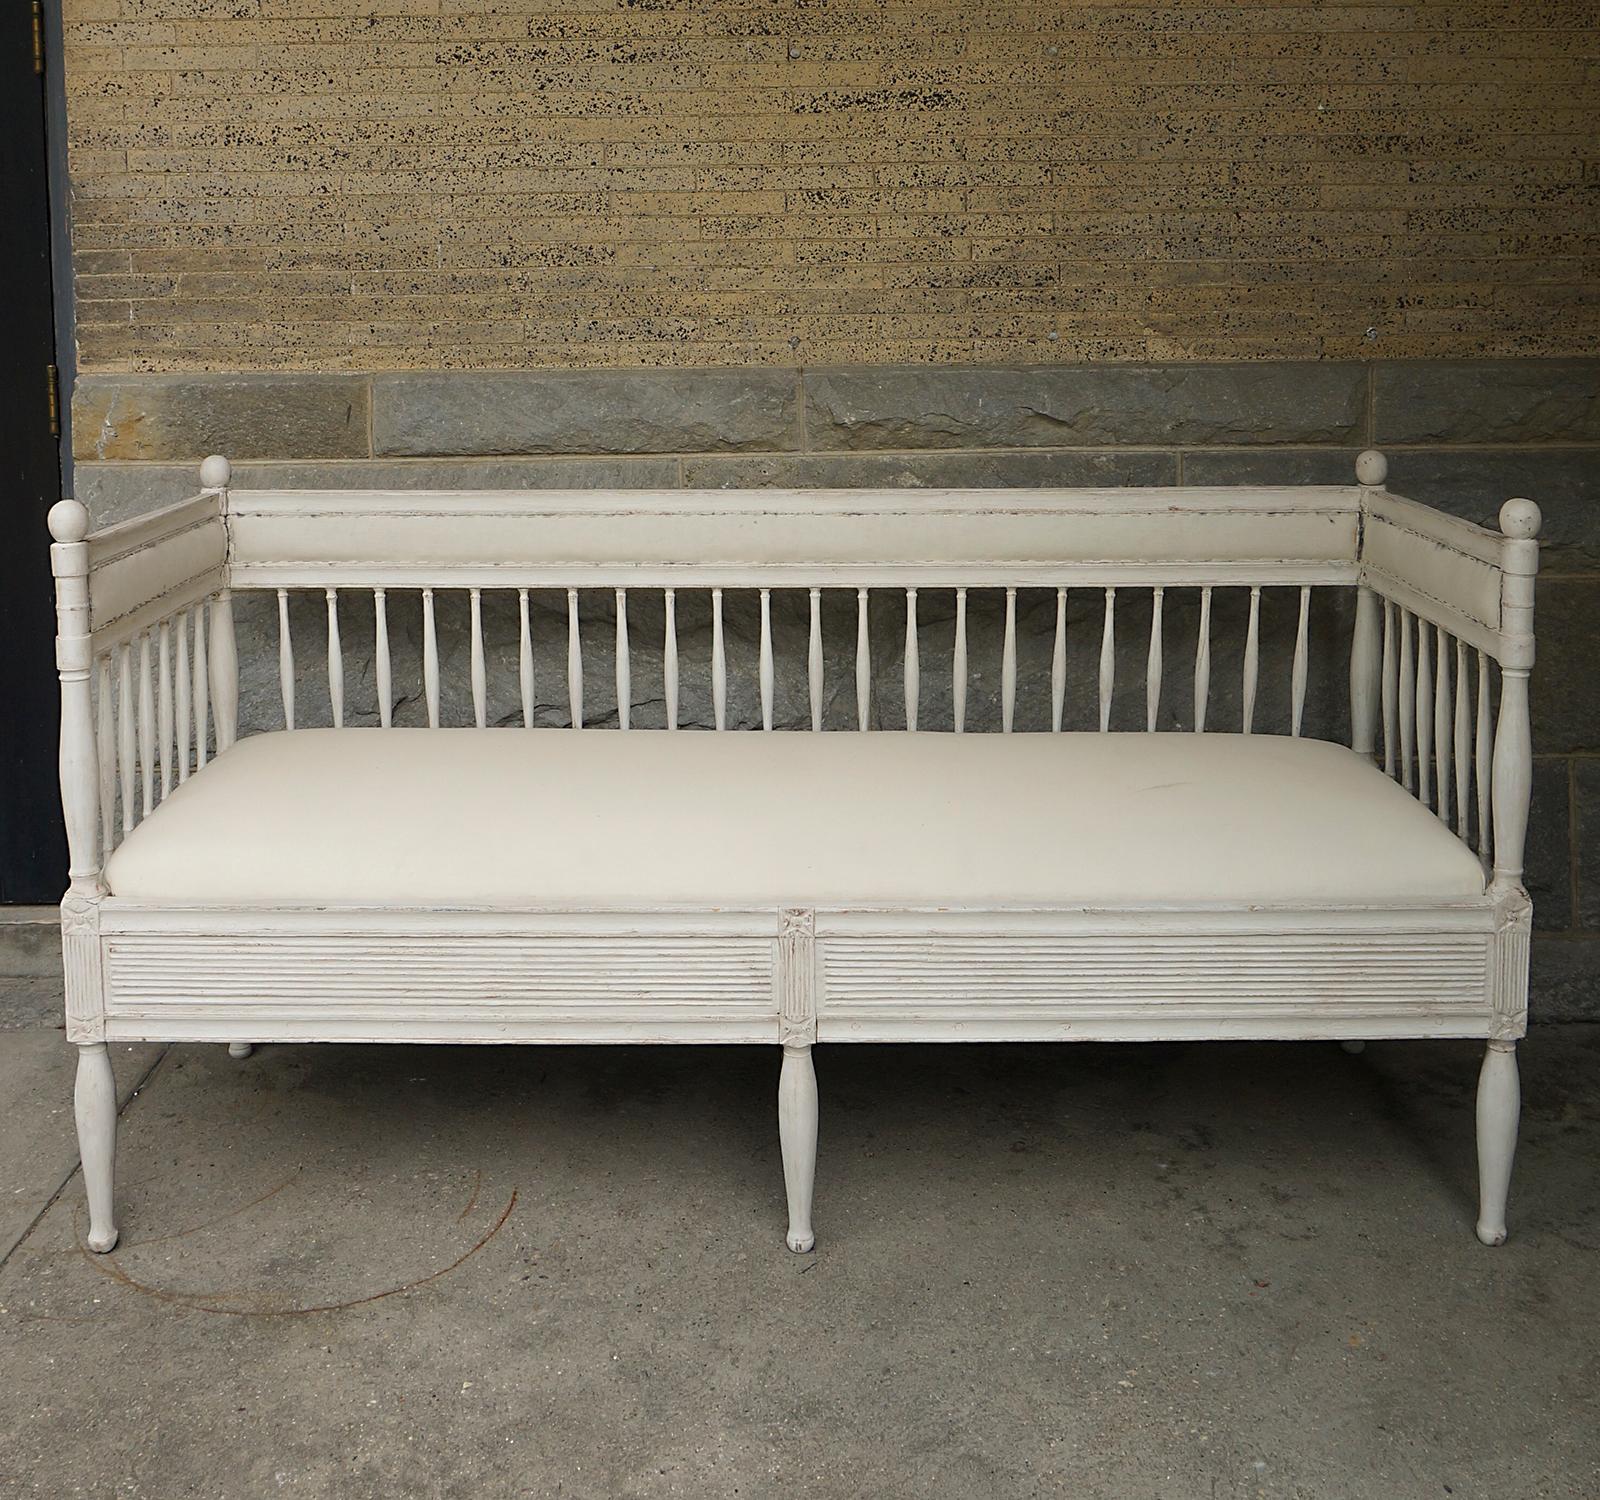 Swedish sofa in the Gustavian style, circa 1850, featuring hand-turned spindles below narrow upholstered panels on the back and sides. The upholstered slip seat fits snugly into reeded panels with carved rosettes above the turned legs.